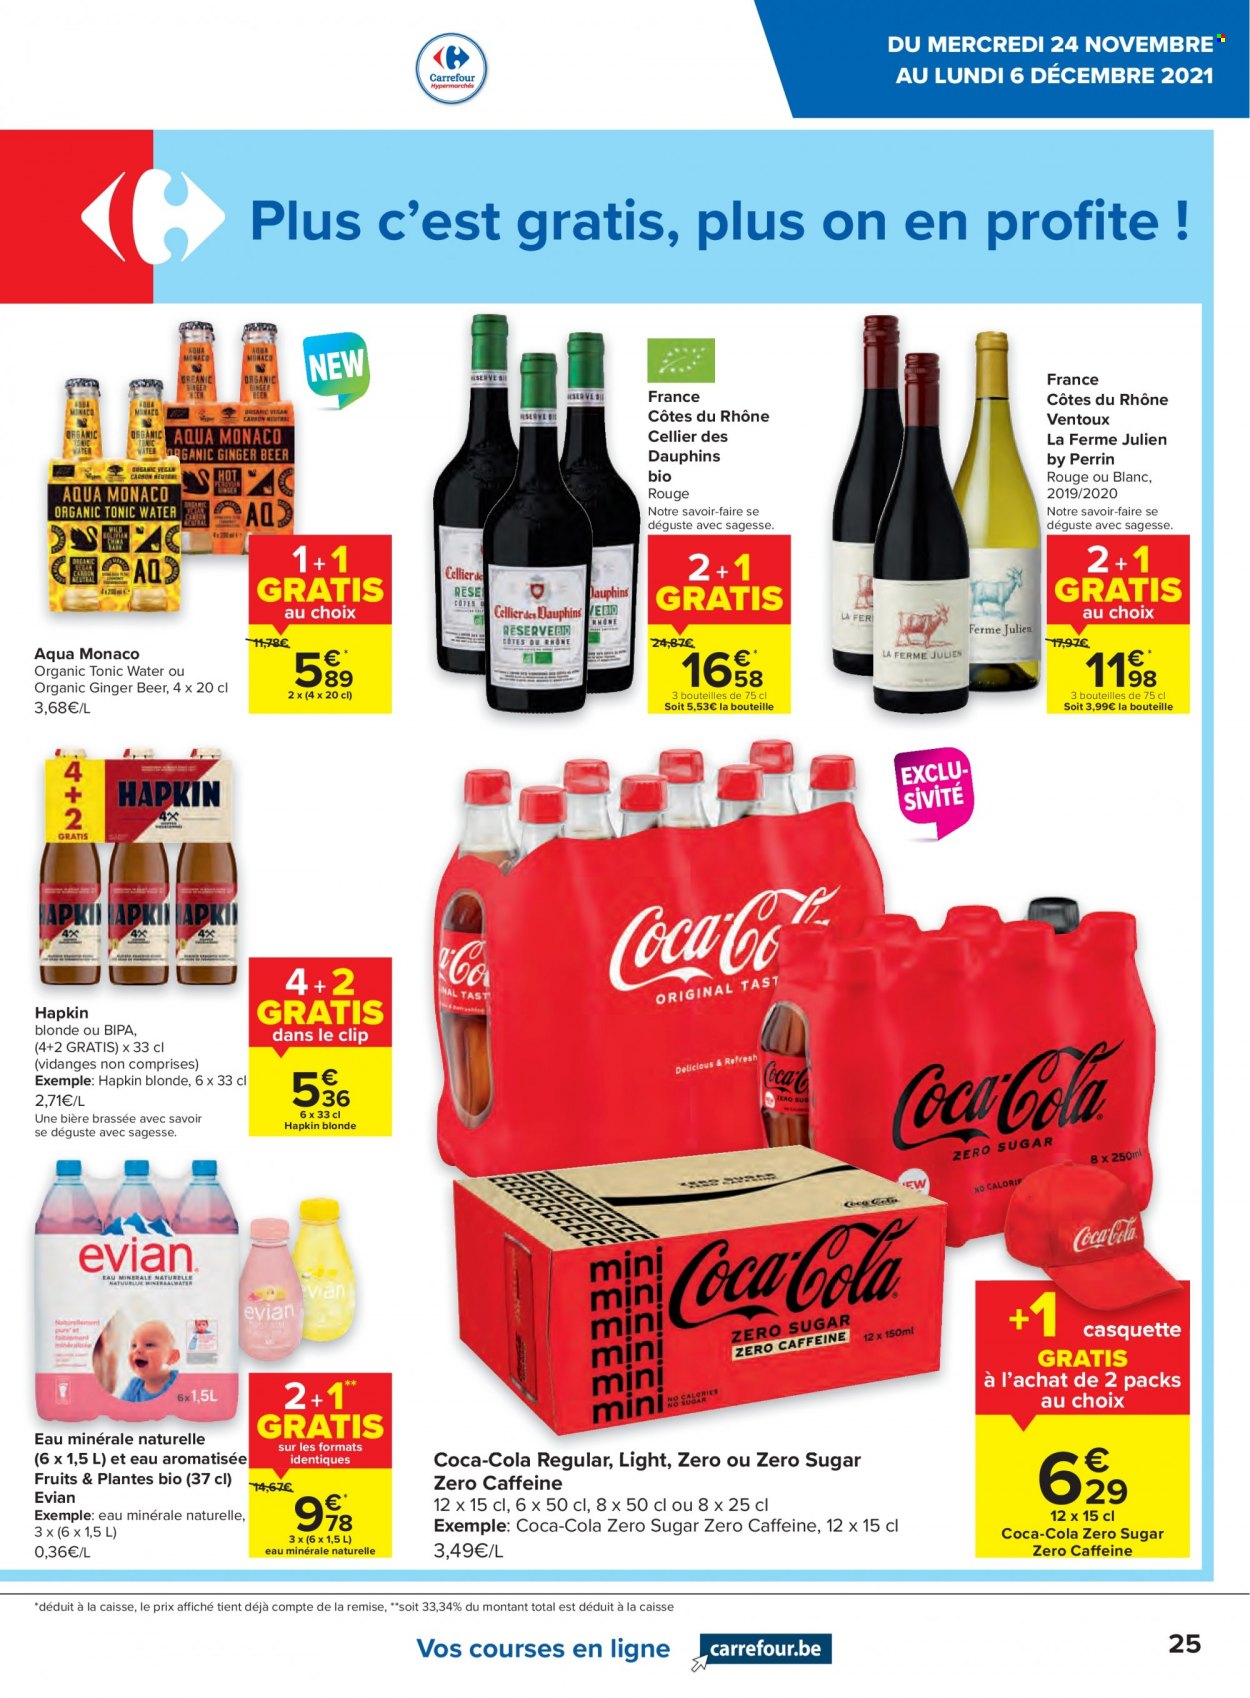 Catalogue Carrefour hypermarkt - 24.11.2021 - 6.12.2021. Page 25.